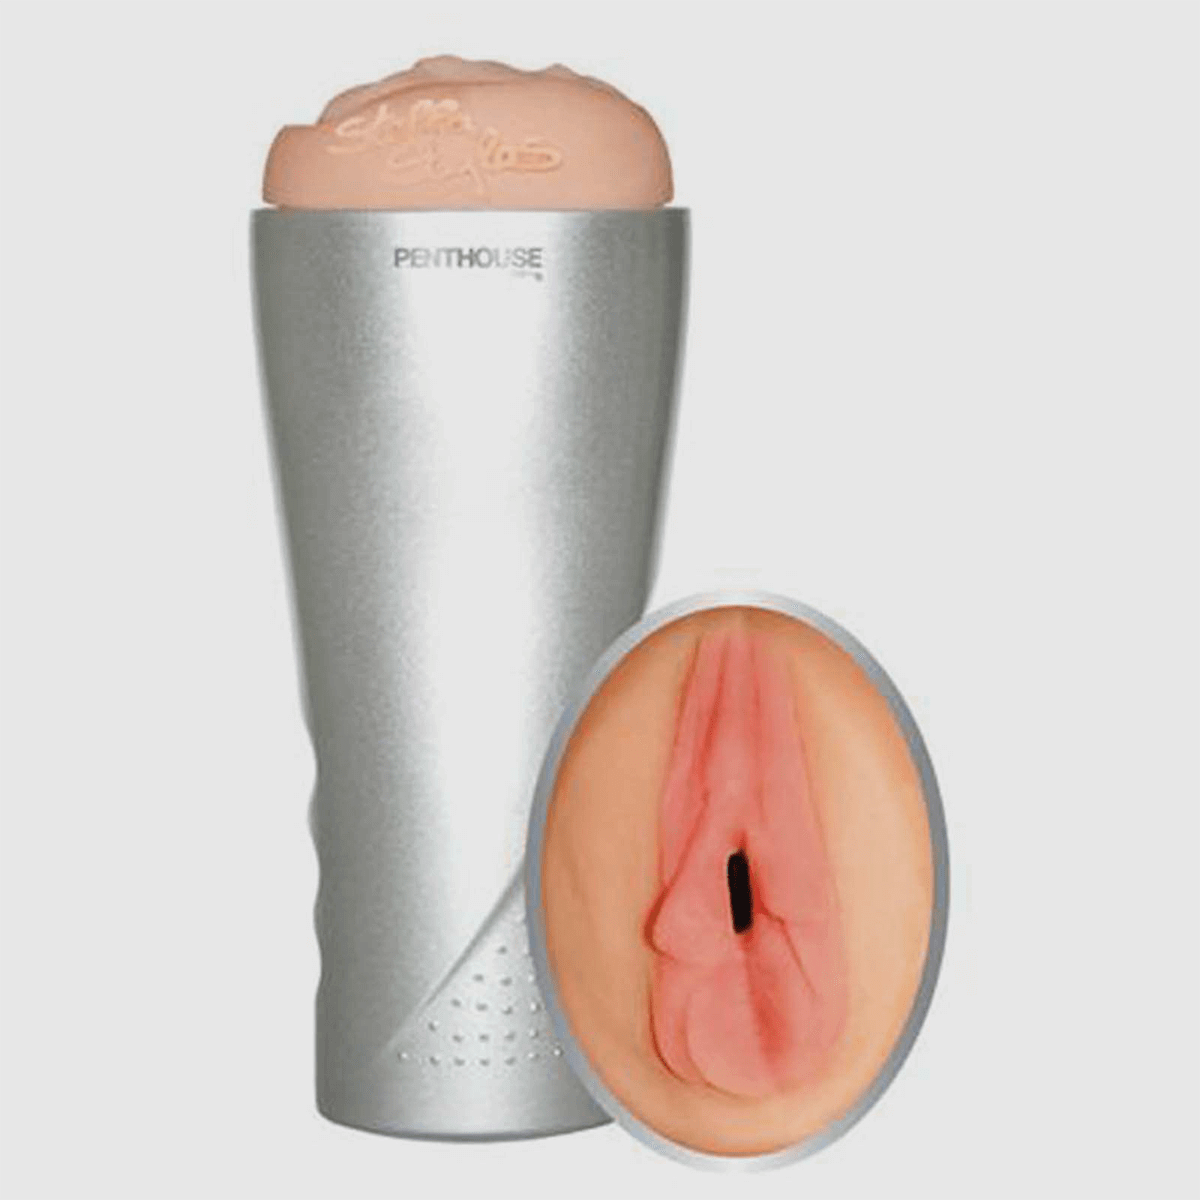 Penthouse Deluxe Vibrating CyberSkin Stroker - Stella - Thorn & Feather Sex Toy Canada